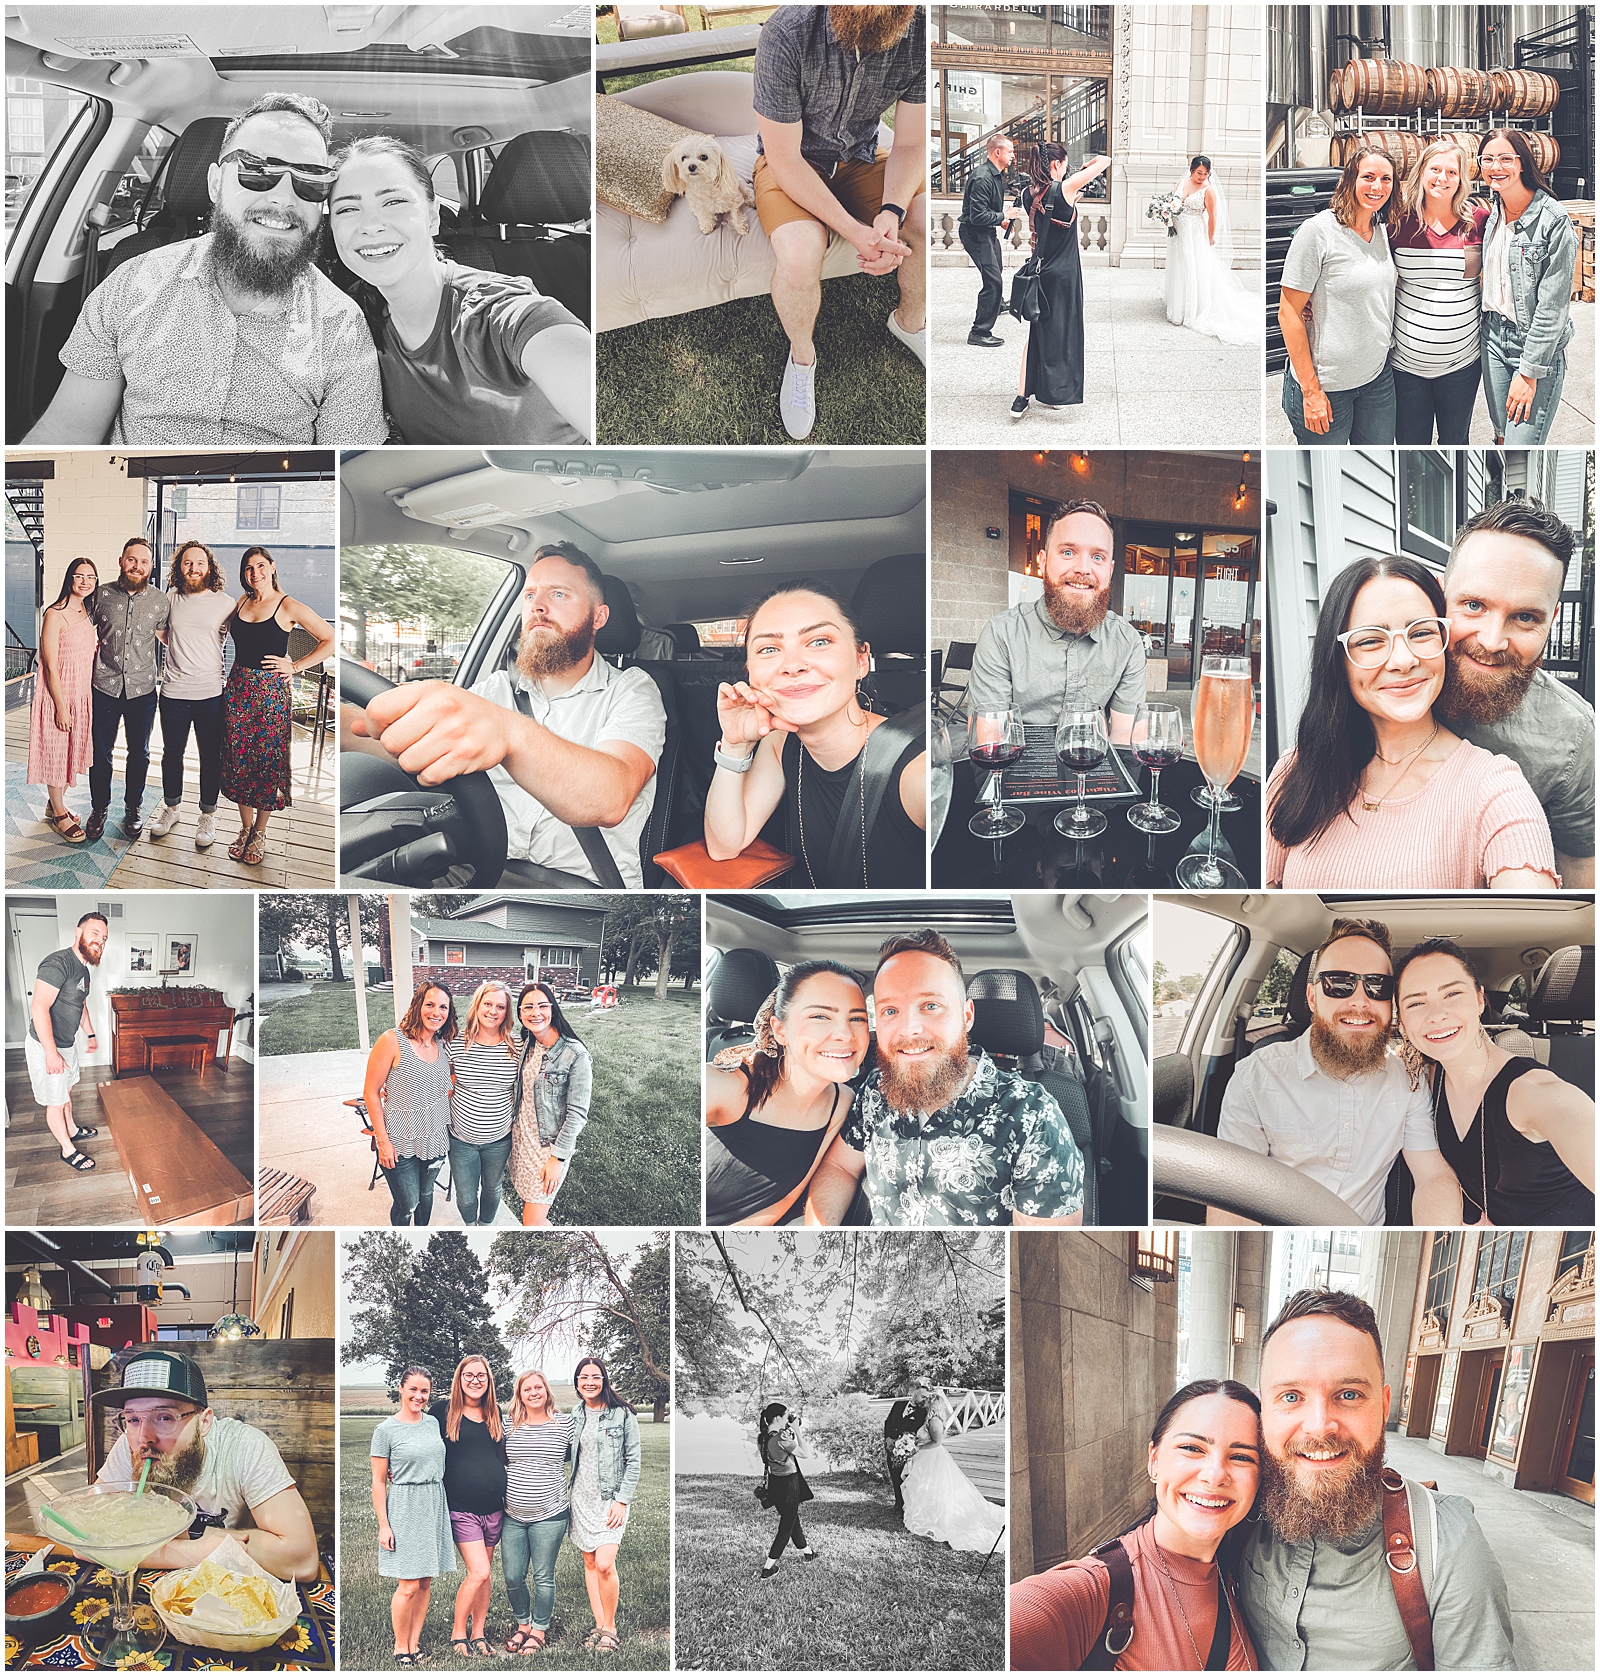 A look at the June 2021 My Life Mondays monthly blog recap with Chicagoland wedding photographer and mentor Kara Evans Photographer.